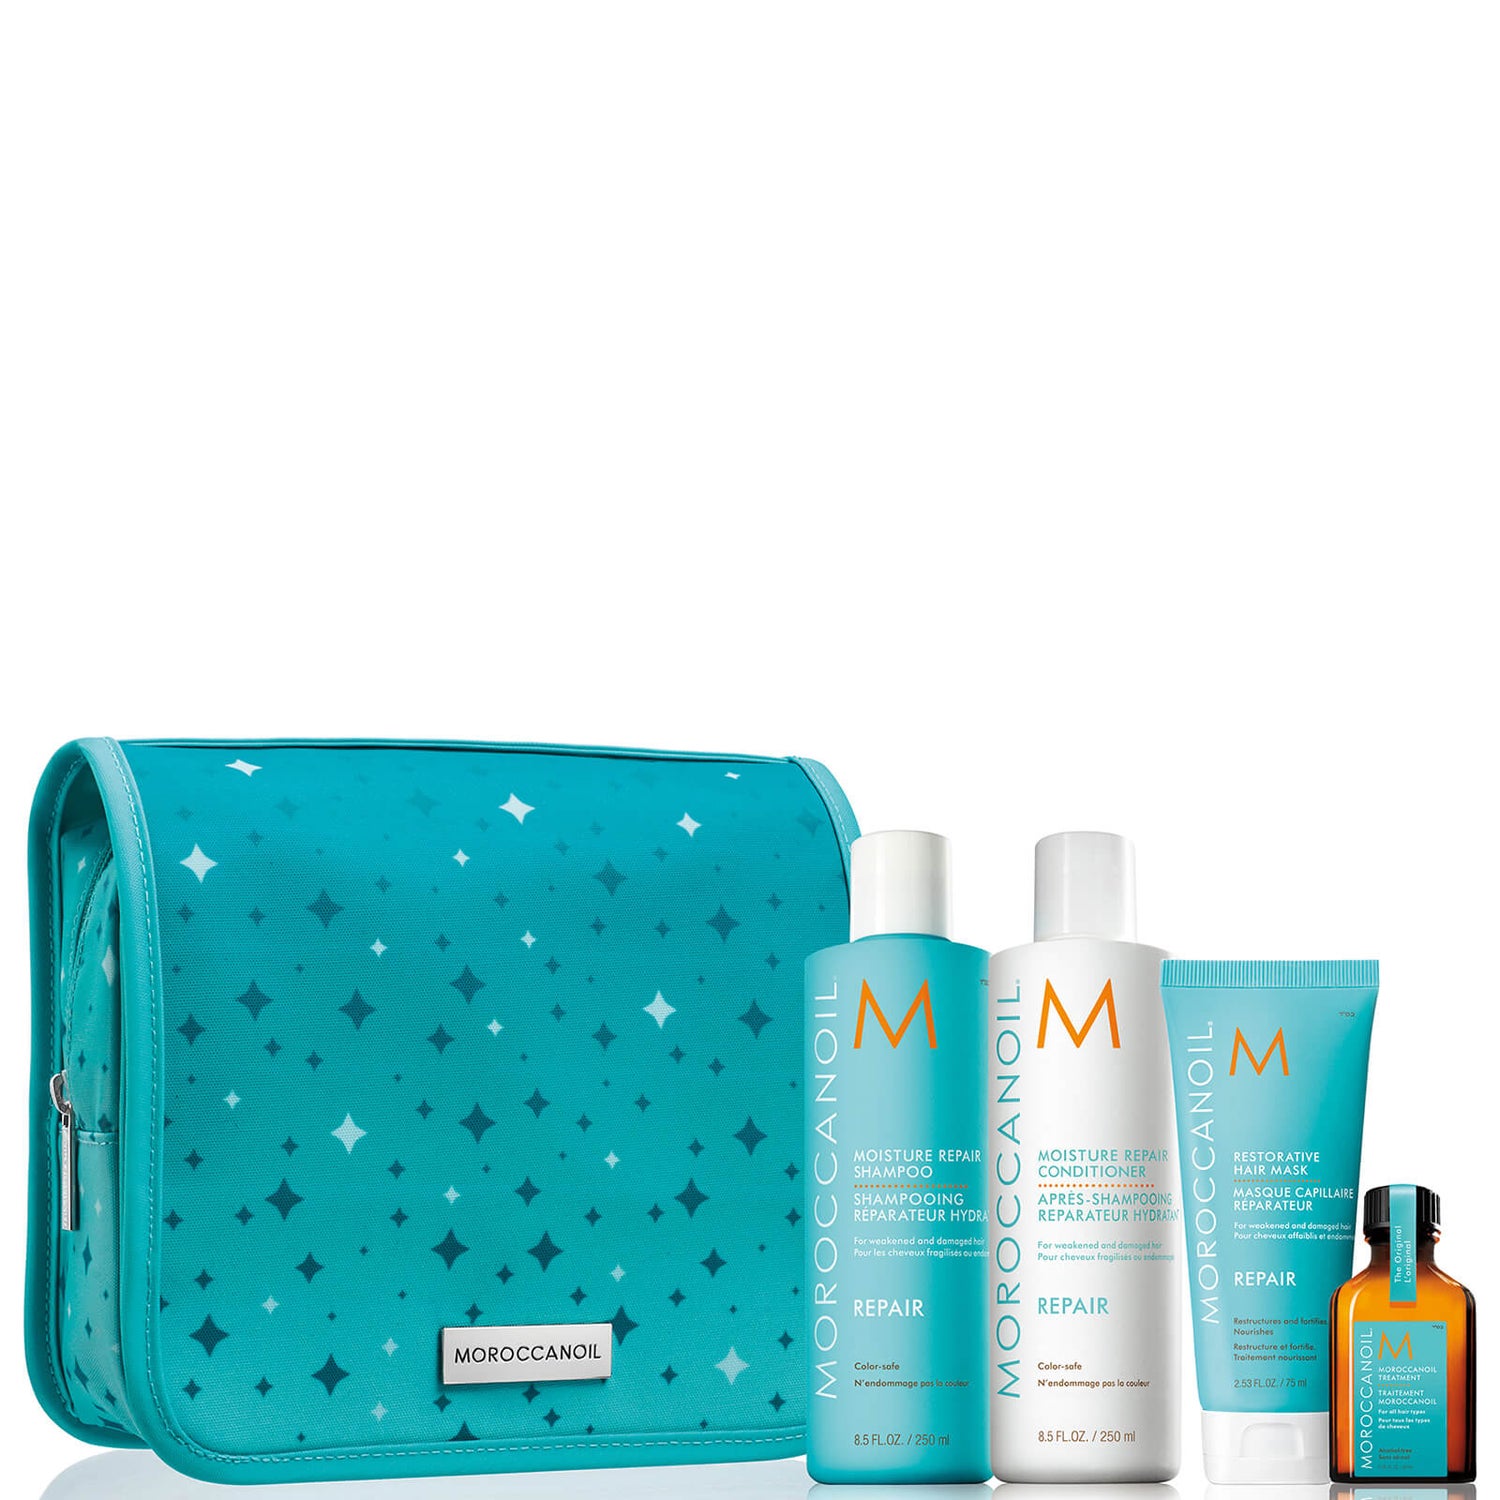 Moroccanoil Repair & Strengthen Collection (Worth £58.70)